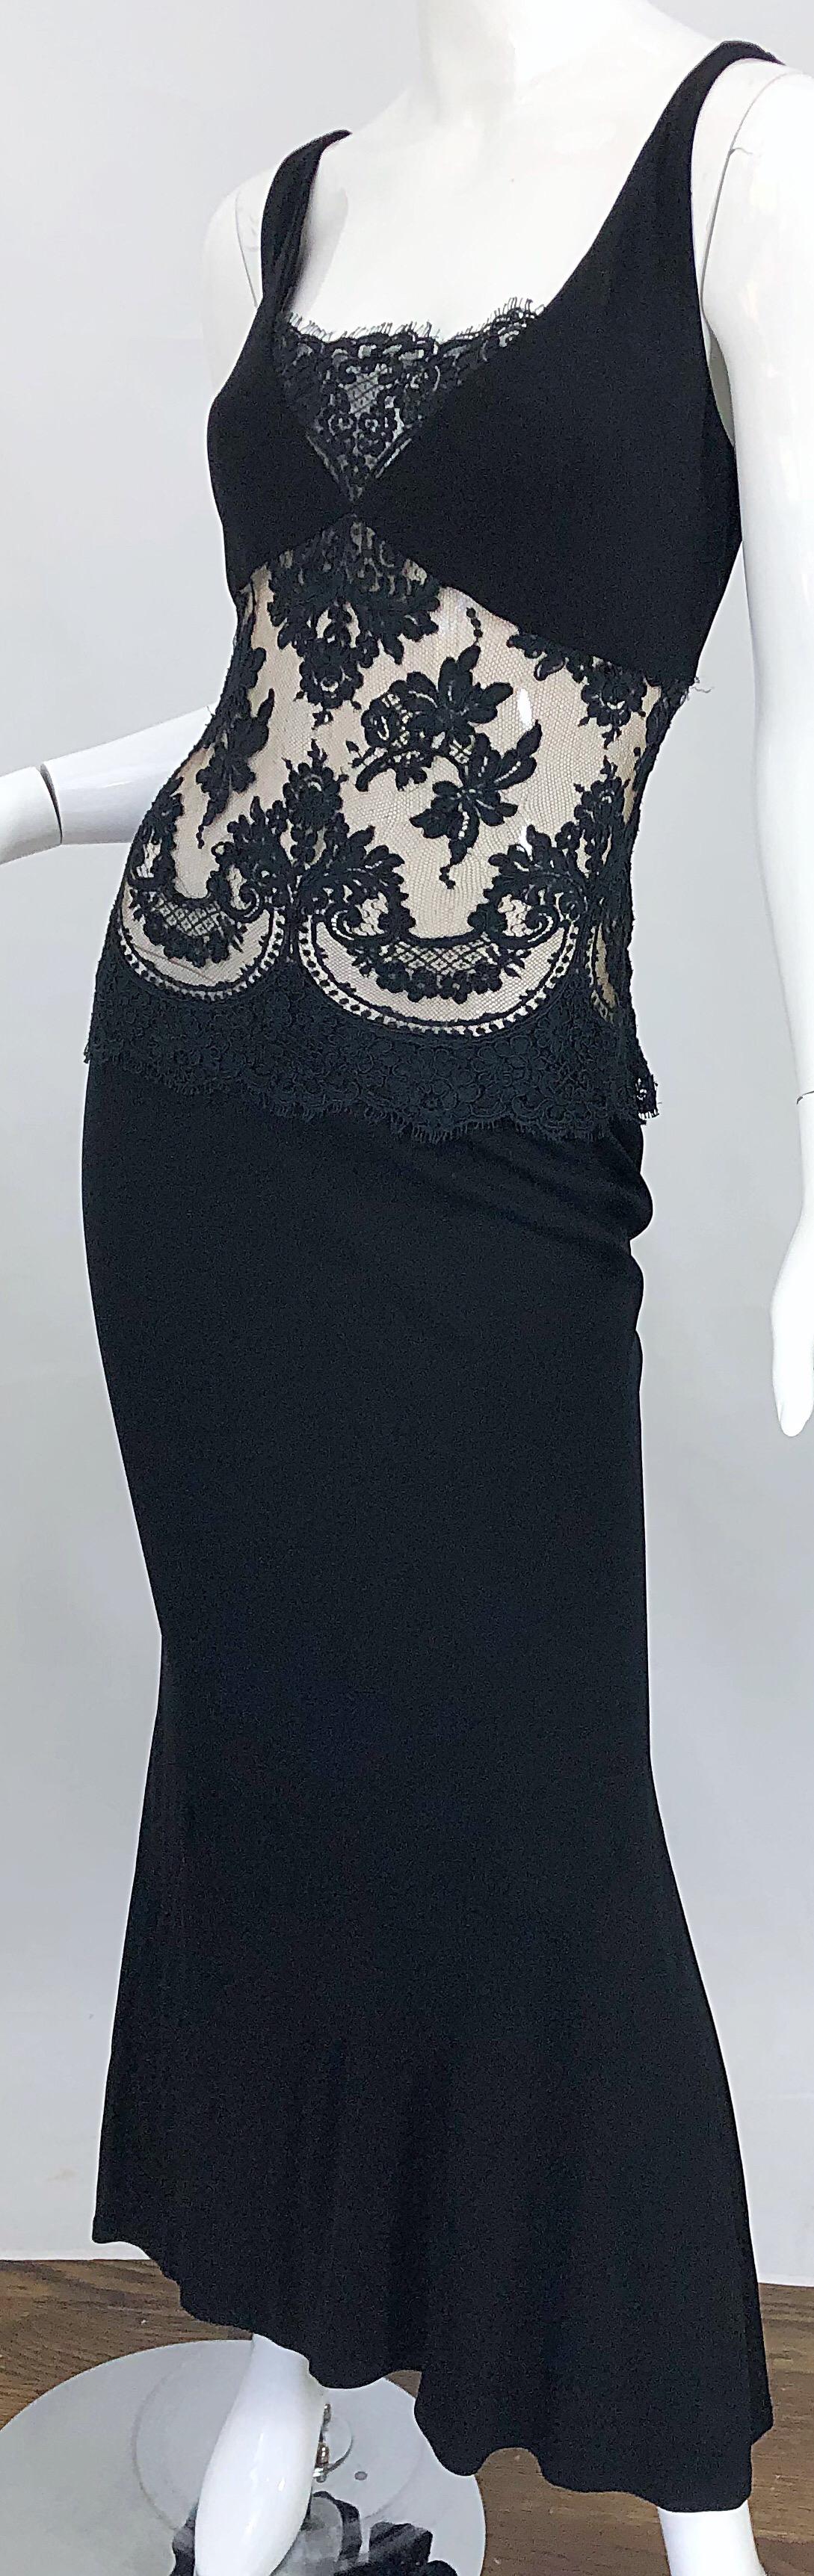 1990s Randolph Duke Black Sexy Lace Cut-Out Sleeveless Vintage 90s Evening Gown 4